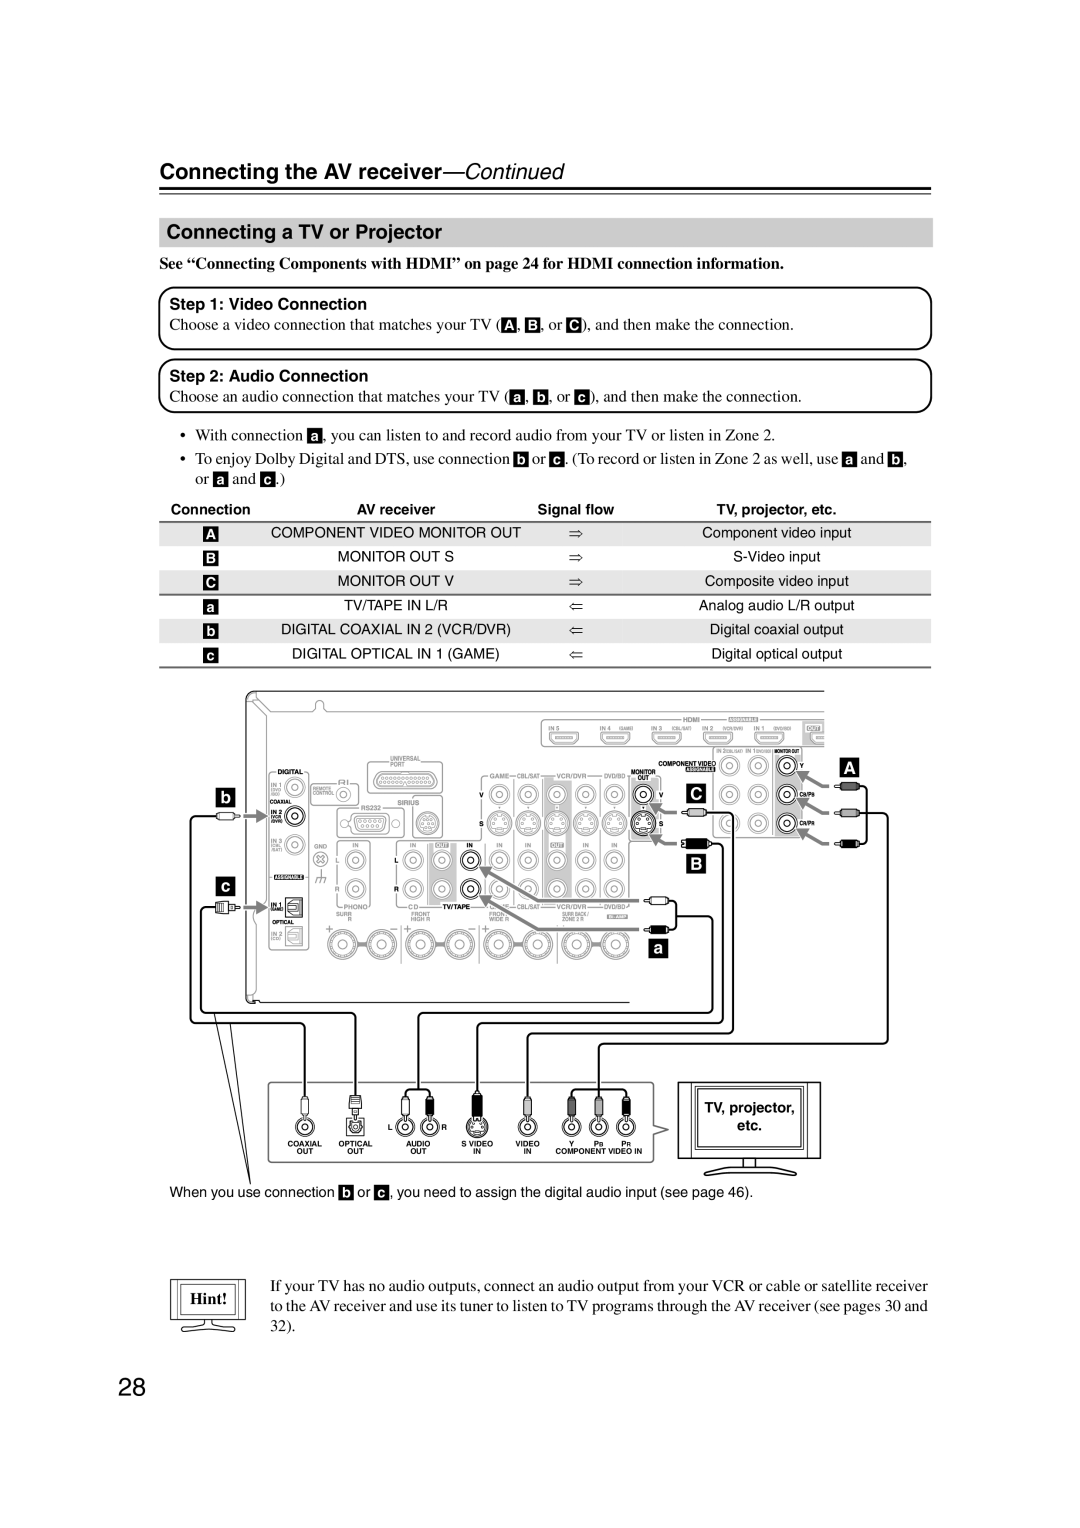 Onkyo TX-SR707 instruction manual Connecting a TV or Projector, C B a, Connecting the AV receiver—Continued, Hint 